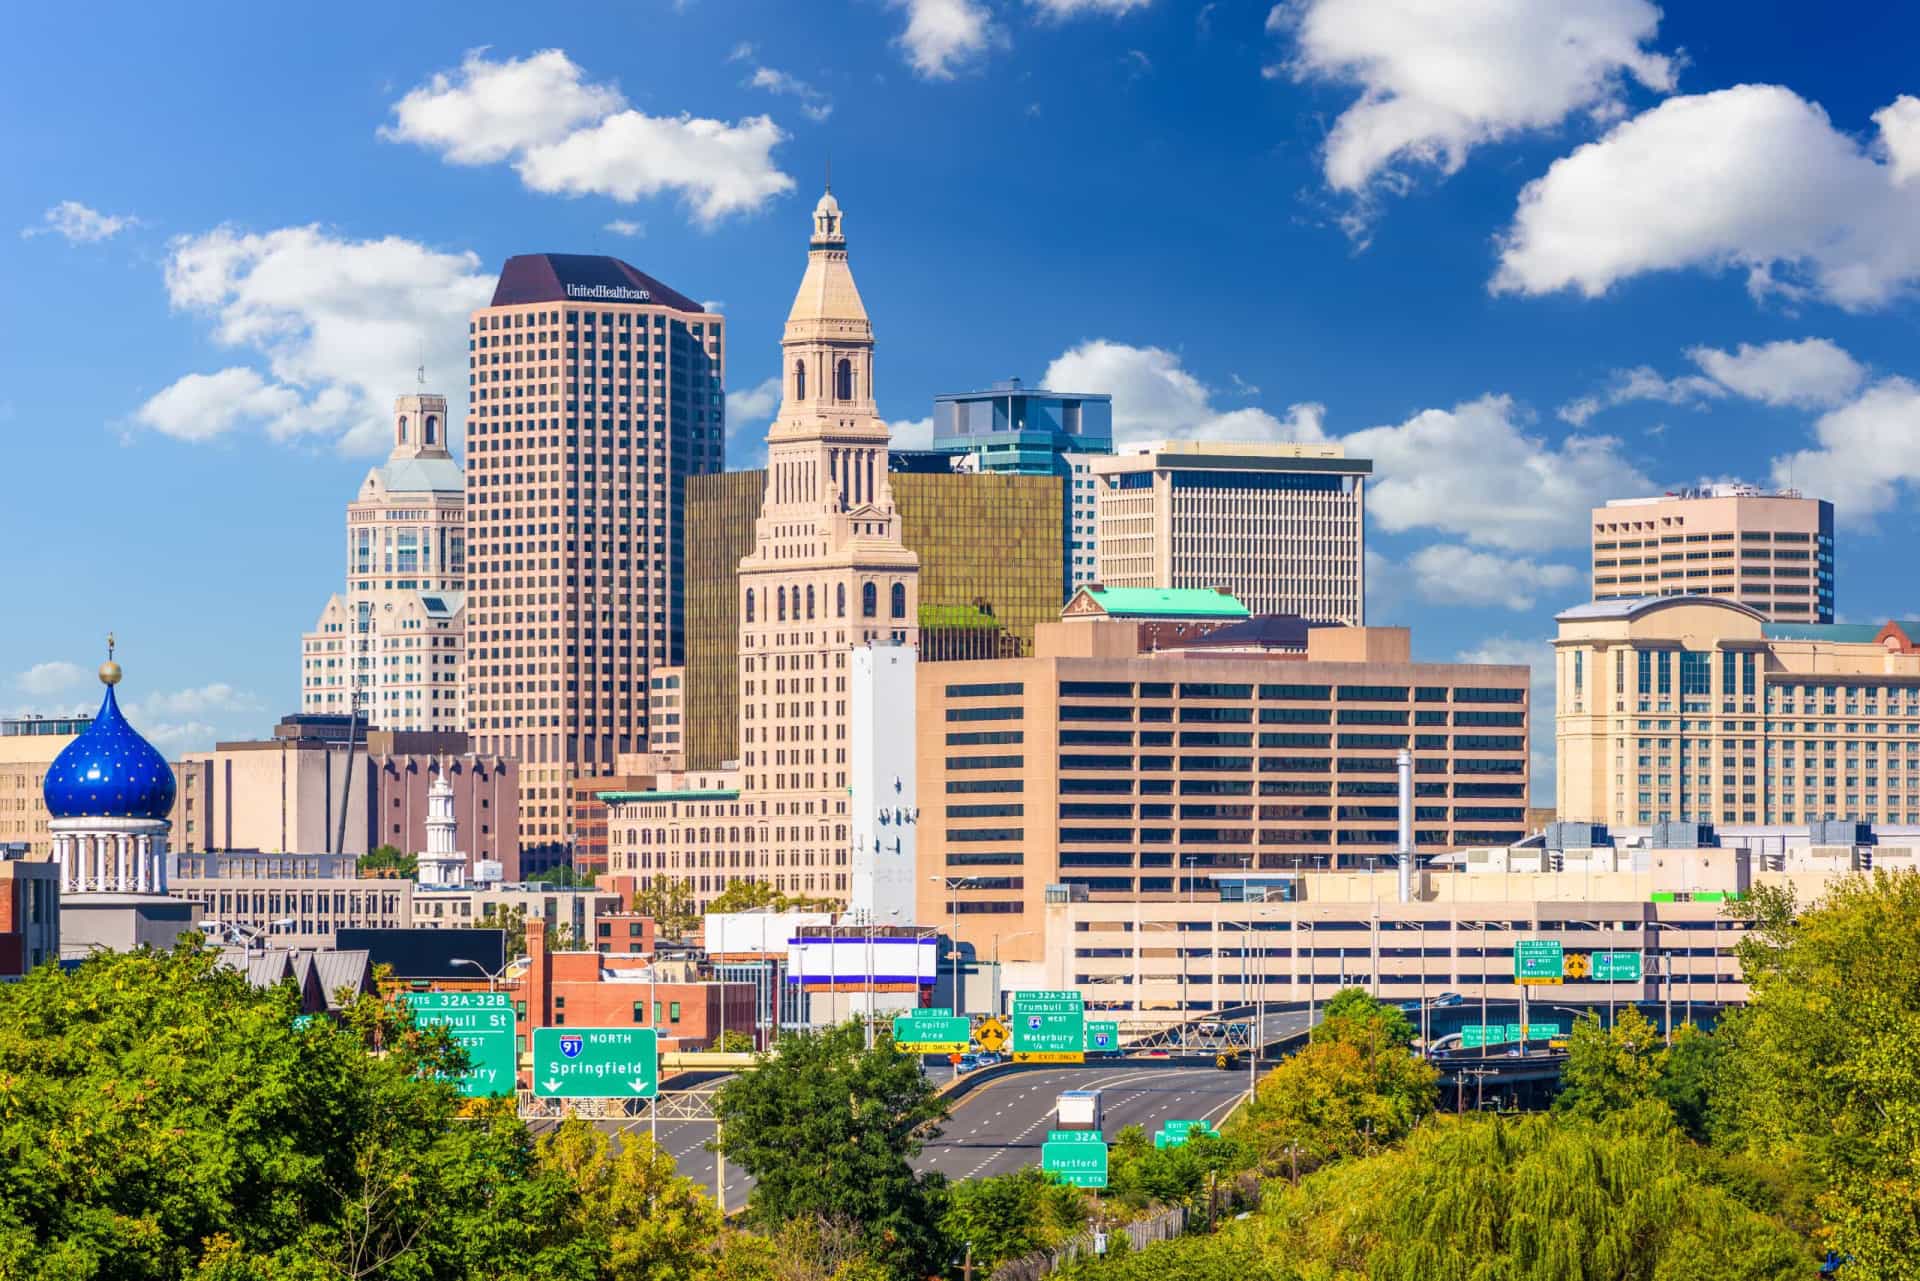 <p>Founded in 1635, Hartford is among the oldest cities in the United States. While modest in size compared with other New England cities, Connecticut's capital nonetheless has plenty to offer the tourist by way of visitor attractions.</p><p><a href="https://www.msn.com/en-us/community/channel/vid-7xx8mnucu55yw63we9va2gwr7uihbxwc68fxqp25x6tg4ftibpra?cvid=94631541bc0f4f89bfd59158d696ad7e">Follow us and access great exclusive content everyday</a></p>